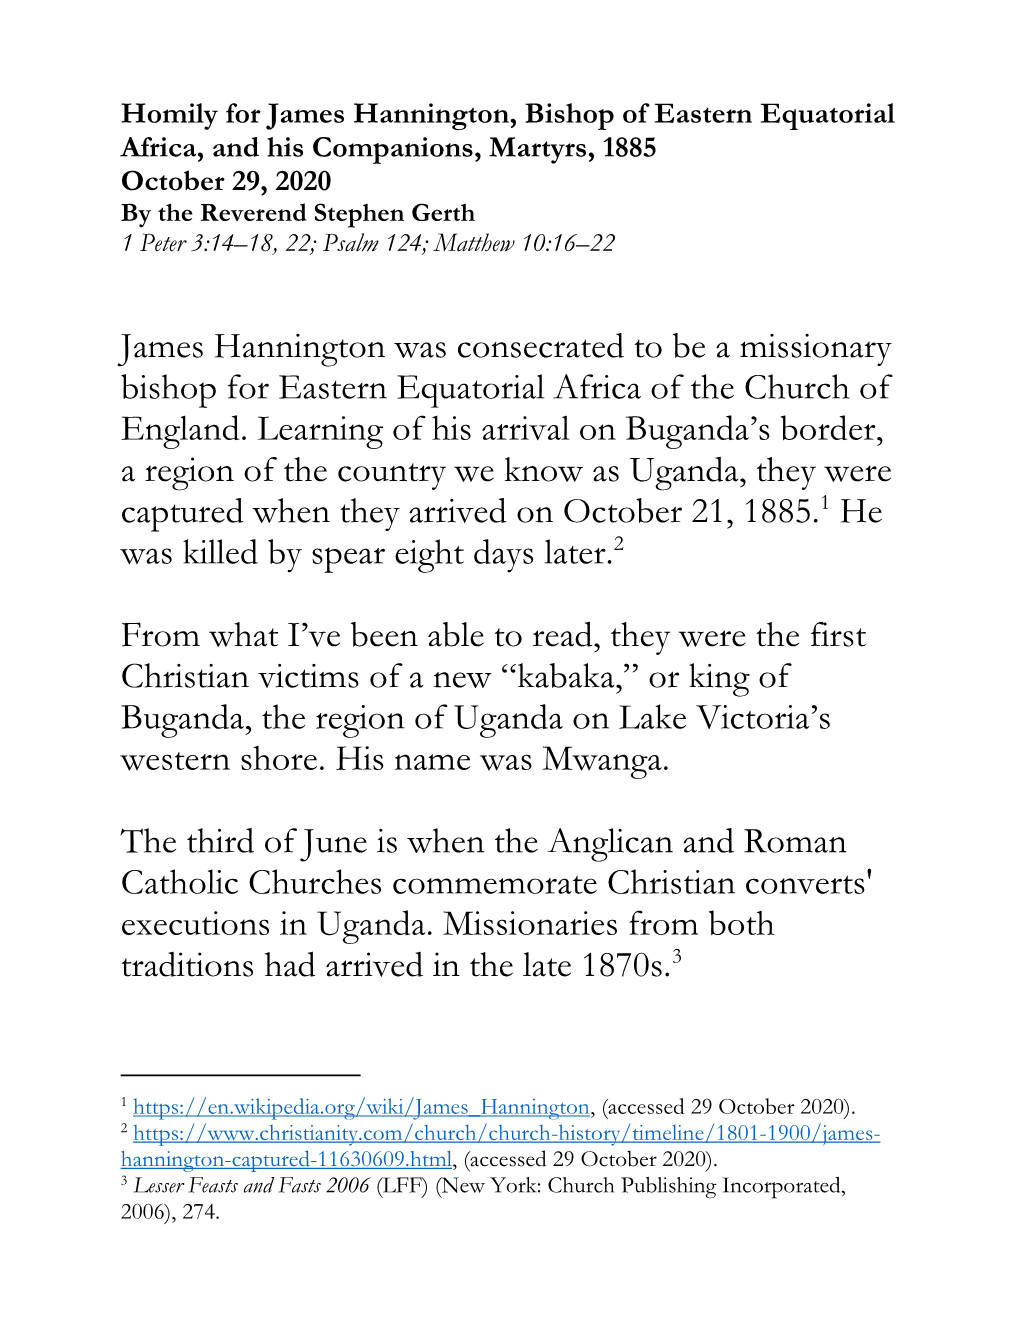 James Hannington Was Consecrated to Be a Missionary Bishop for Eastern Equatorial Africa of the Church of England